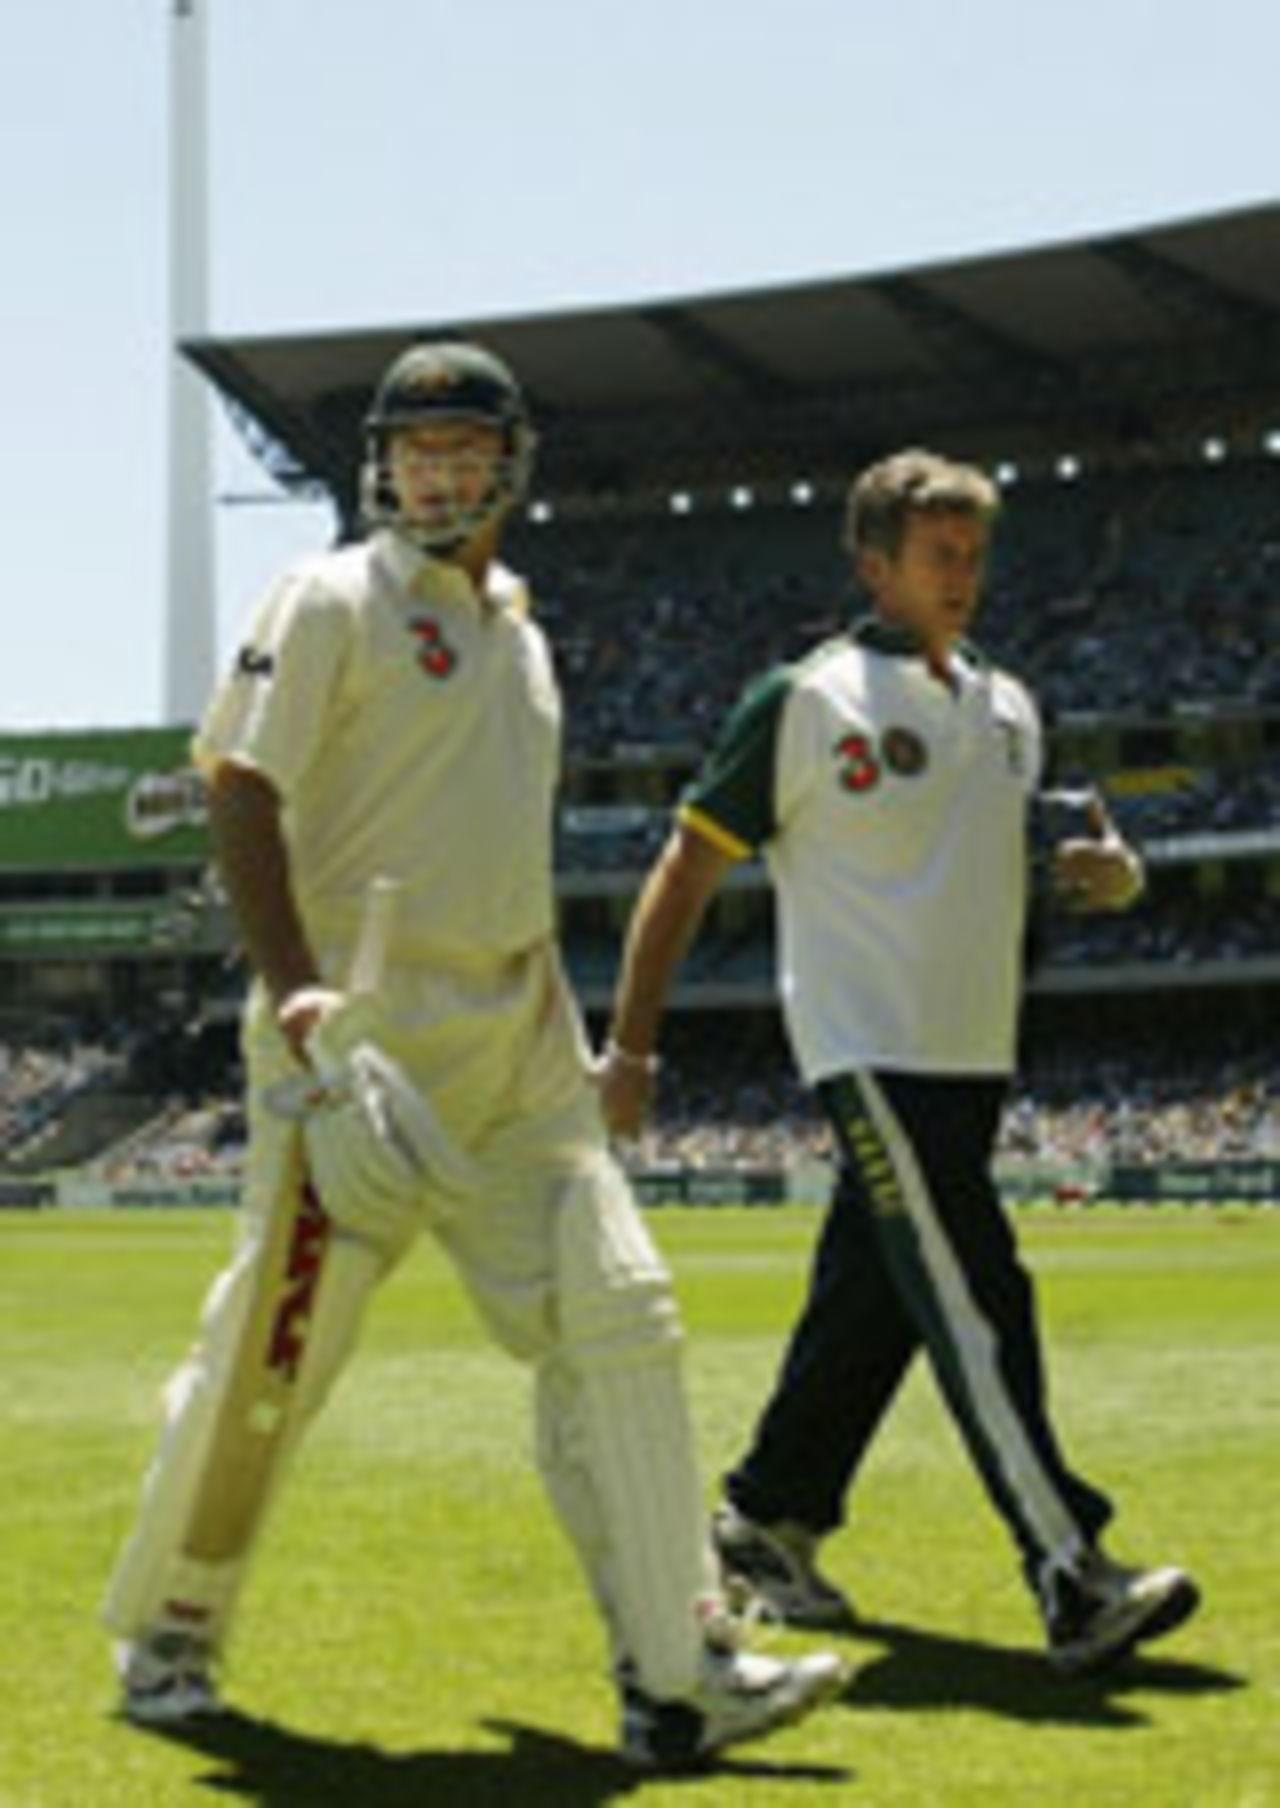 Steve Waugh goes off after taking a blow on the elbow from Ajit Agarkar, 3rd Test, Melbourne, 3rd day, December 28, 2003